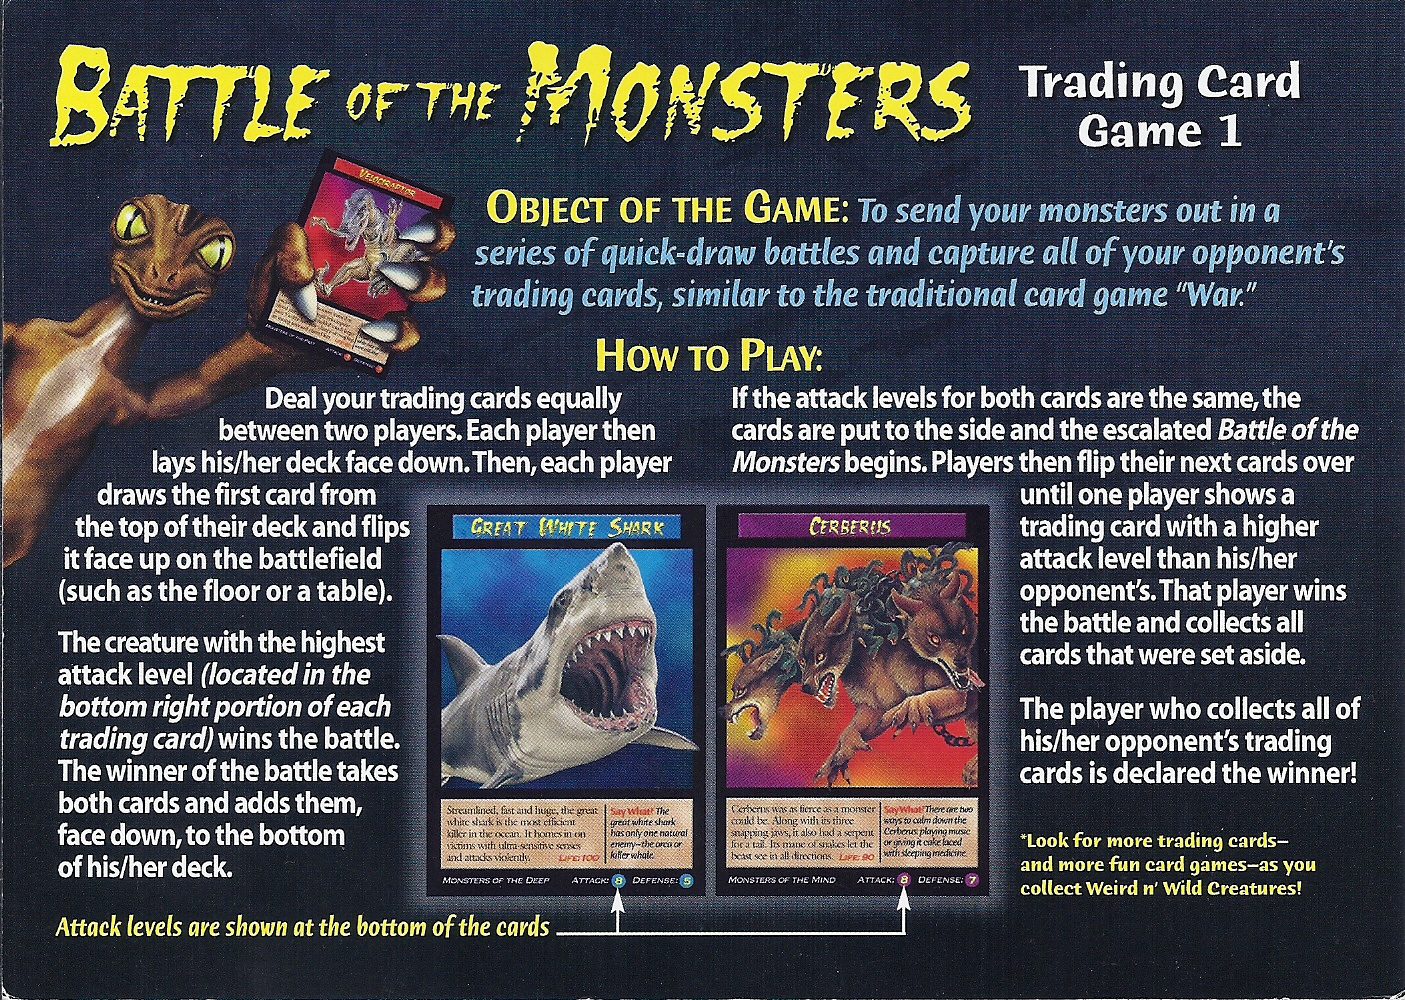 Battle of the Monsters Trading Card Game 1 | Weird n' Wild Creatures Wiki |  Fandom